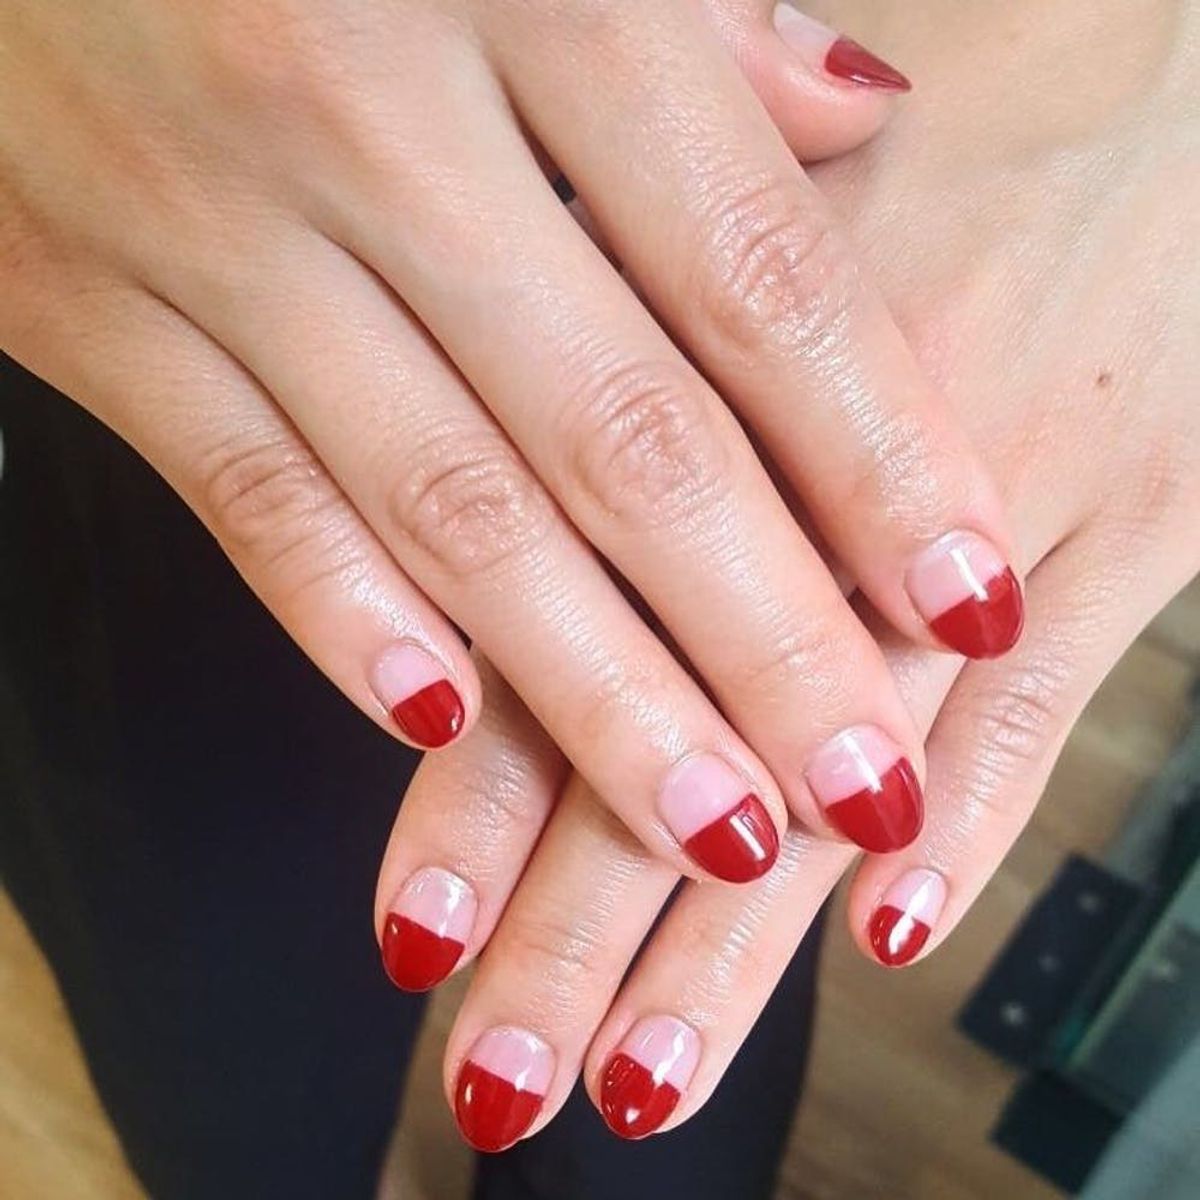 22 Fall Nail Trends to Copy Now